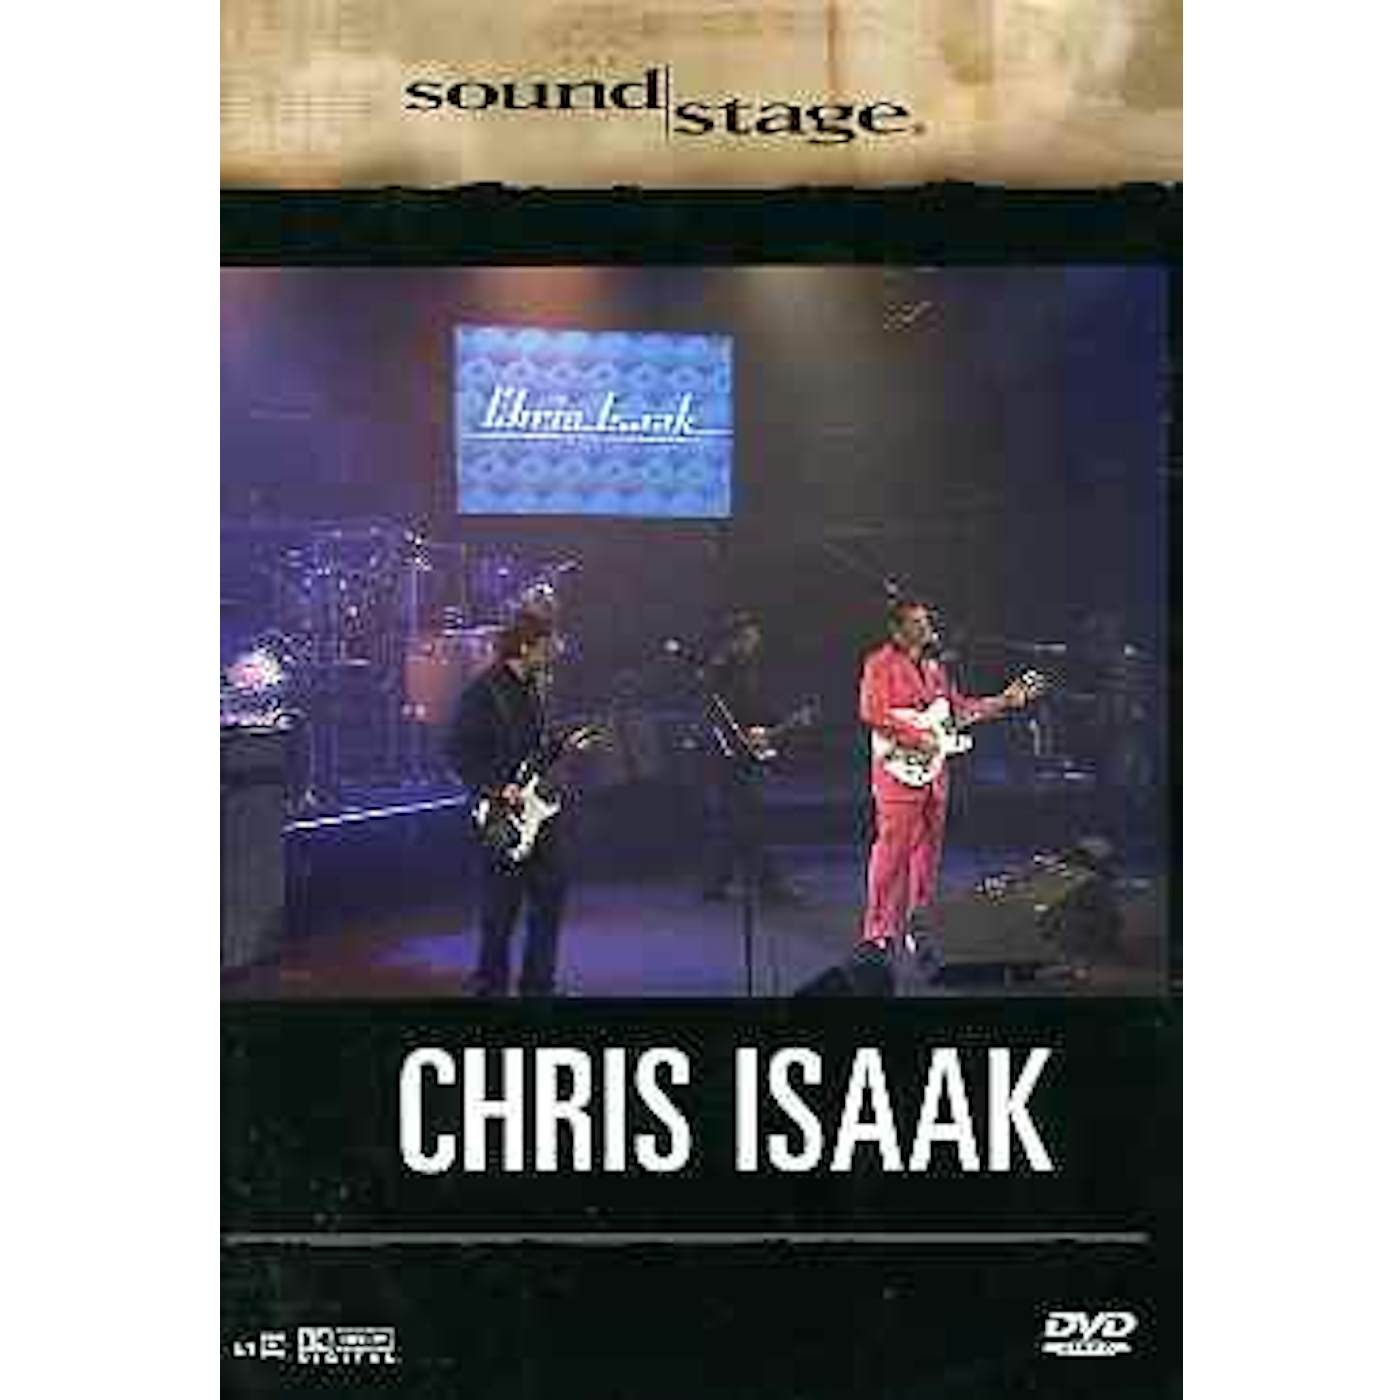 Chris Isaak SOUNDSTAGE DVD